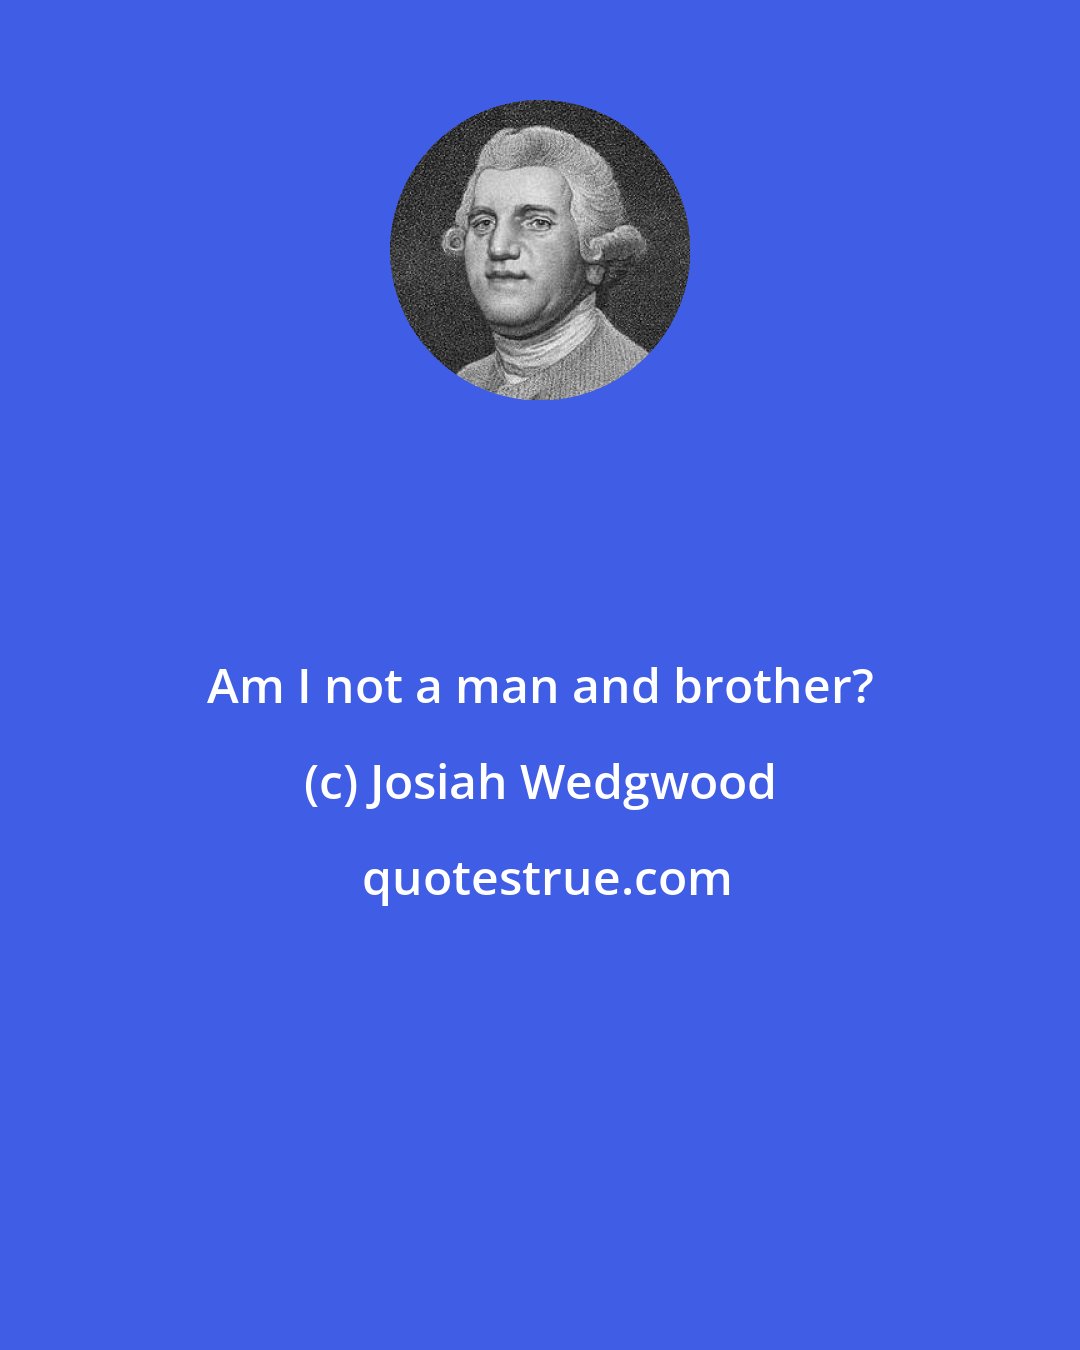 Josiah Wedgwood: Am I not a man and brother?